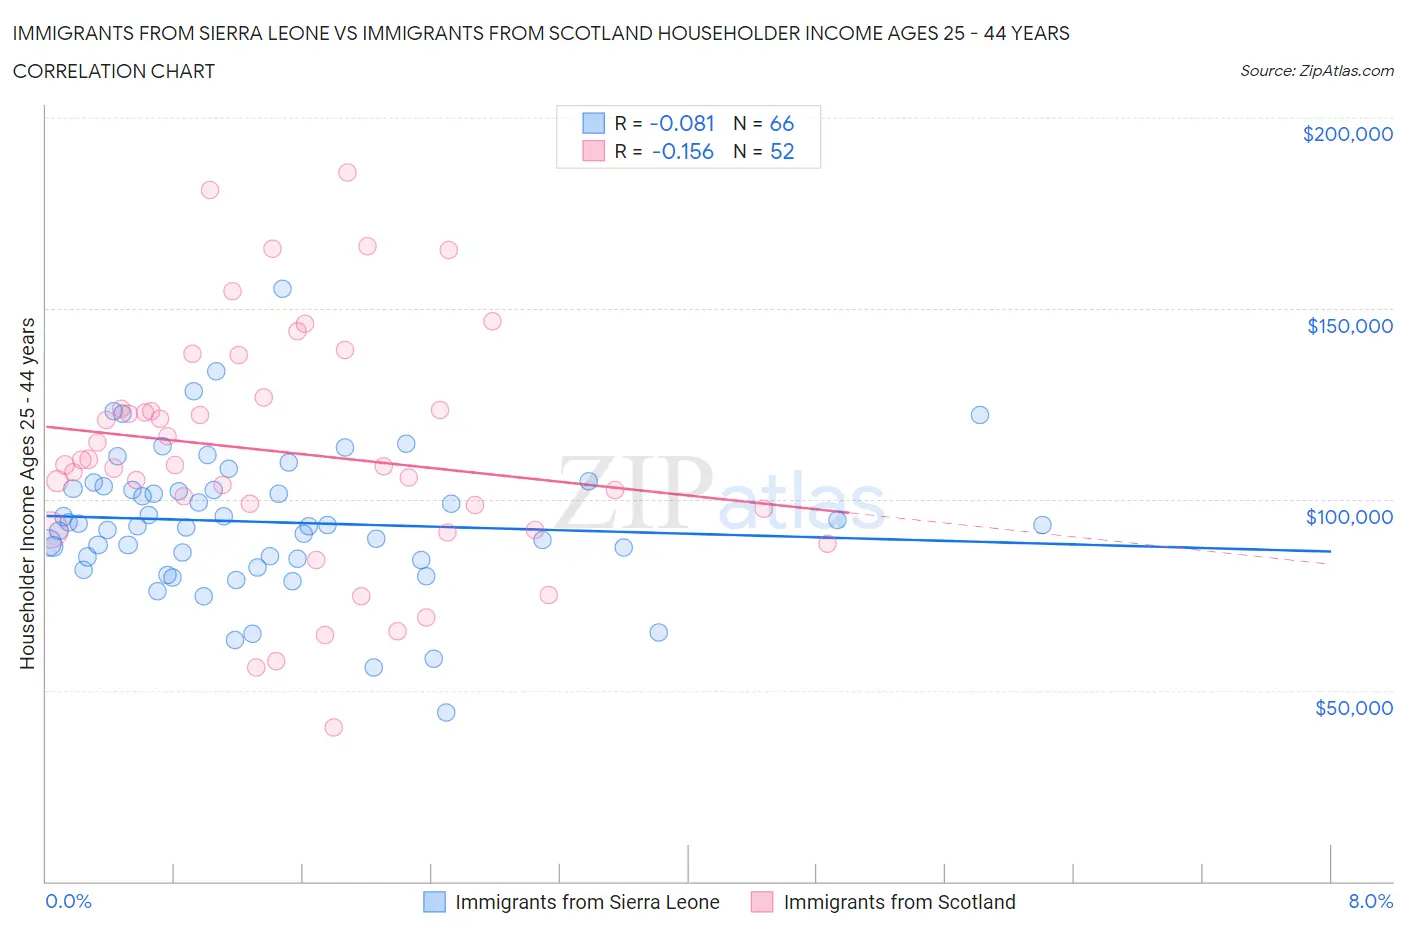 Immigrants from Sierra Leone vs Immigrants from Scotland Householder Income Ages 25 - 44 years